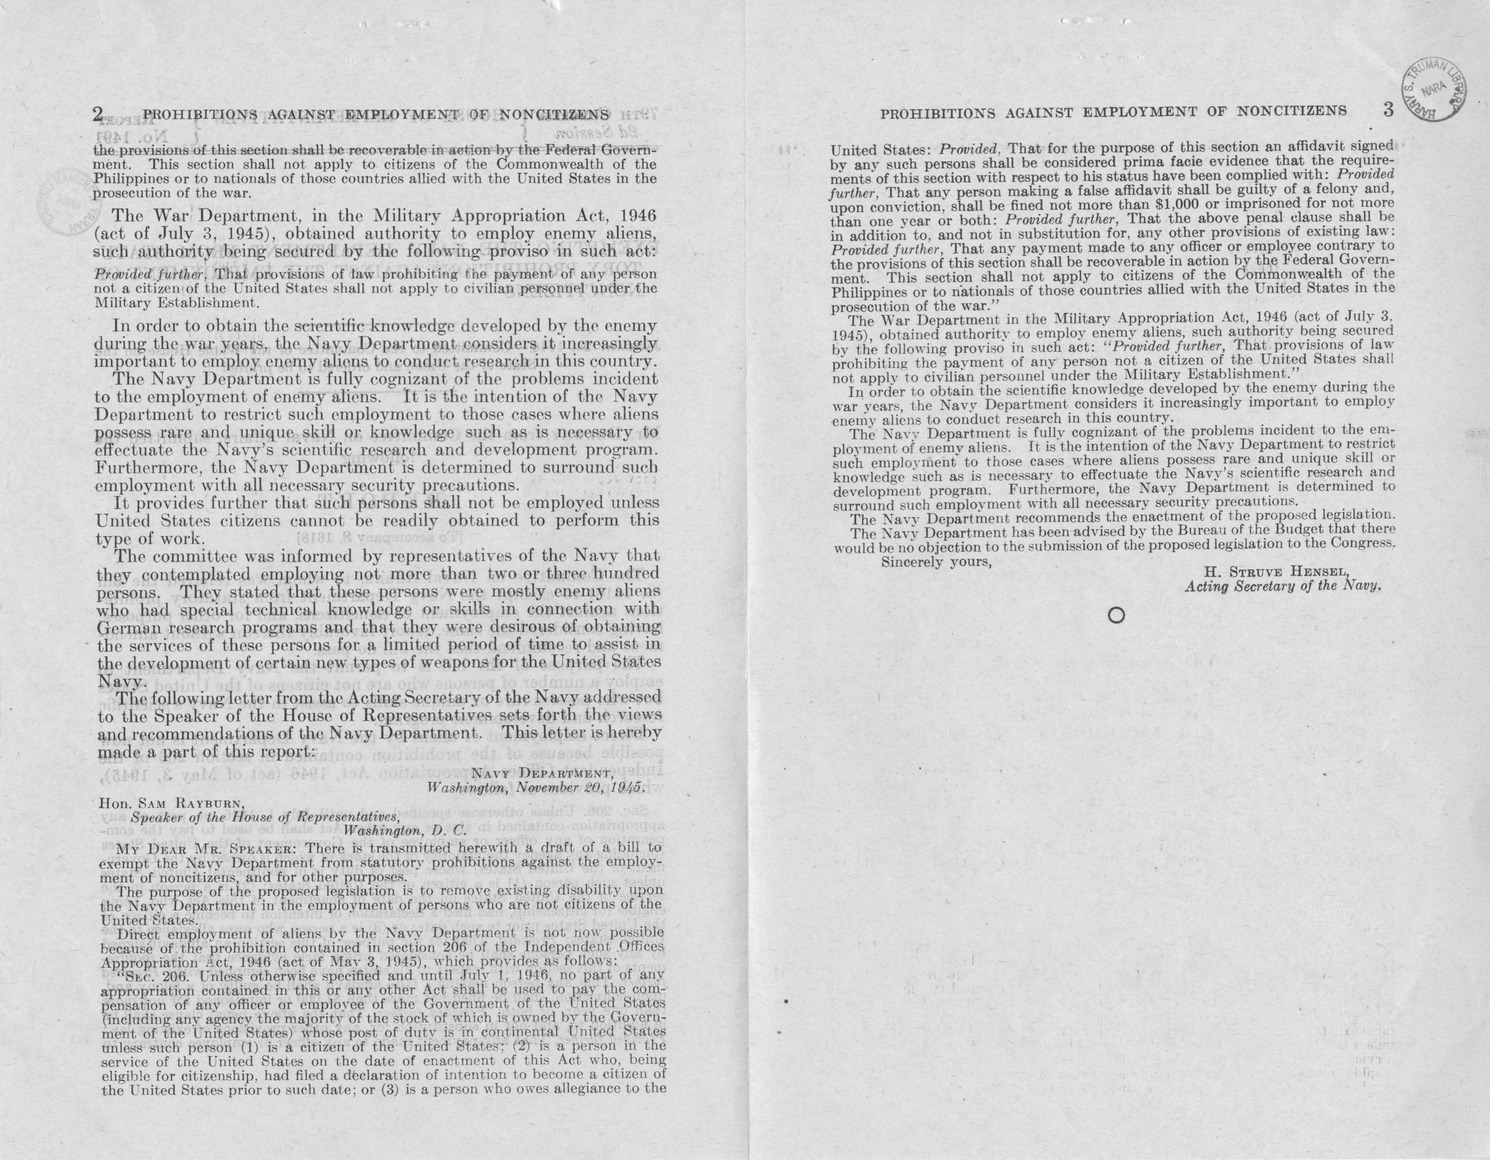 Memorandum from Paul H. Appleby to M. C. Latta, S. 1618, To Exempt the Navy Department From Statutory Prohibitions Against the Employment of Non-Citizens, with Attachments